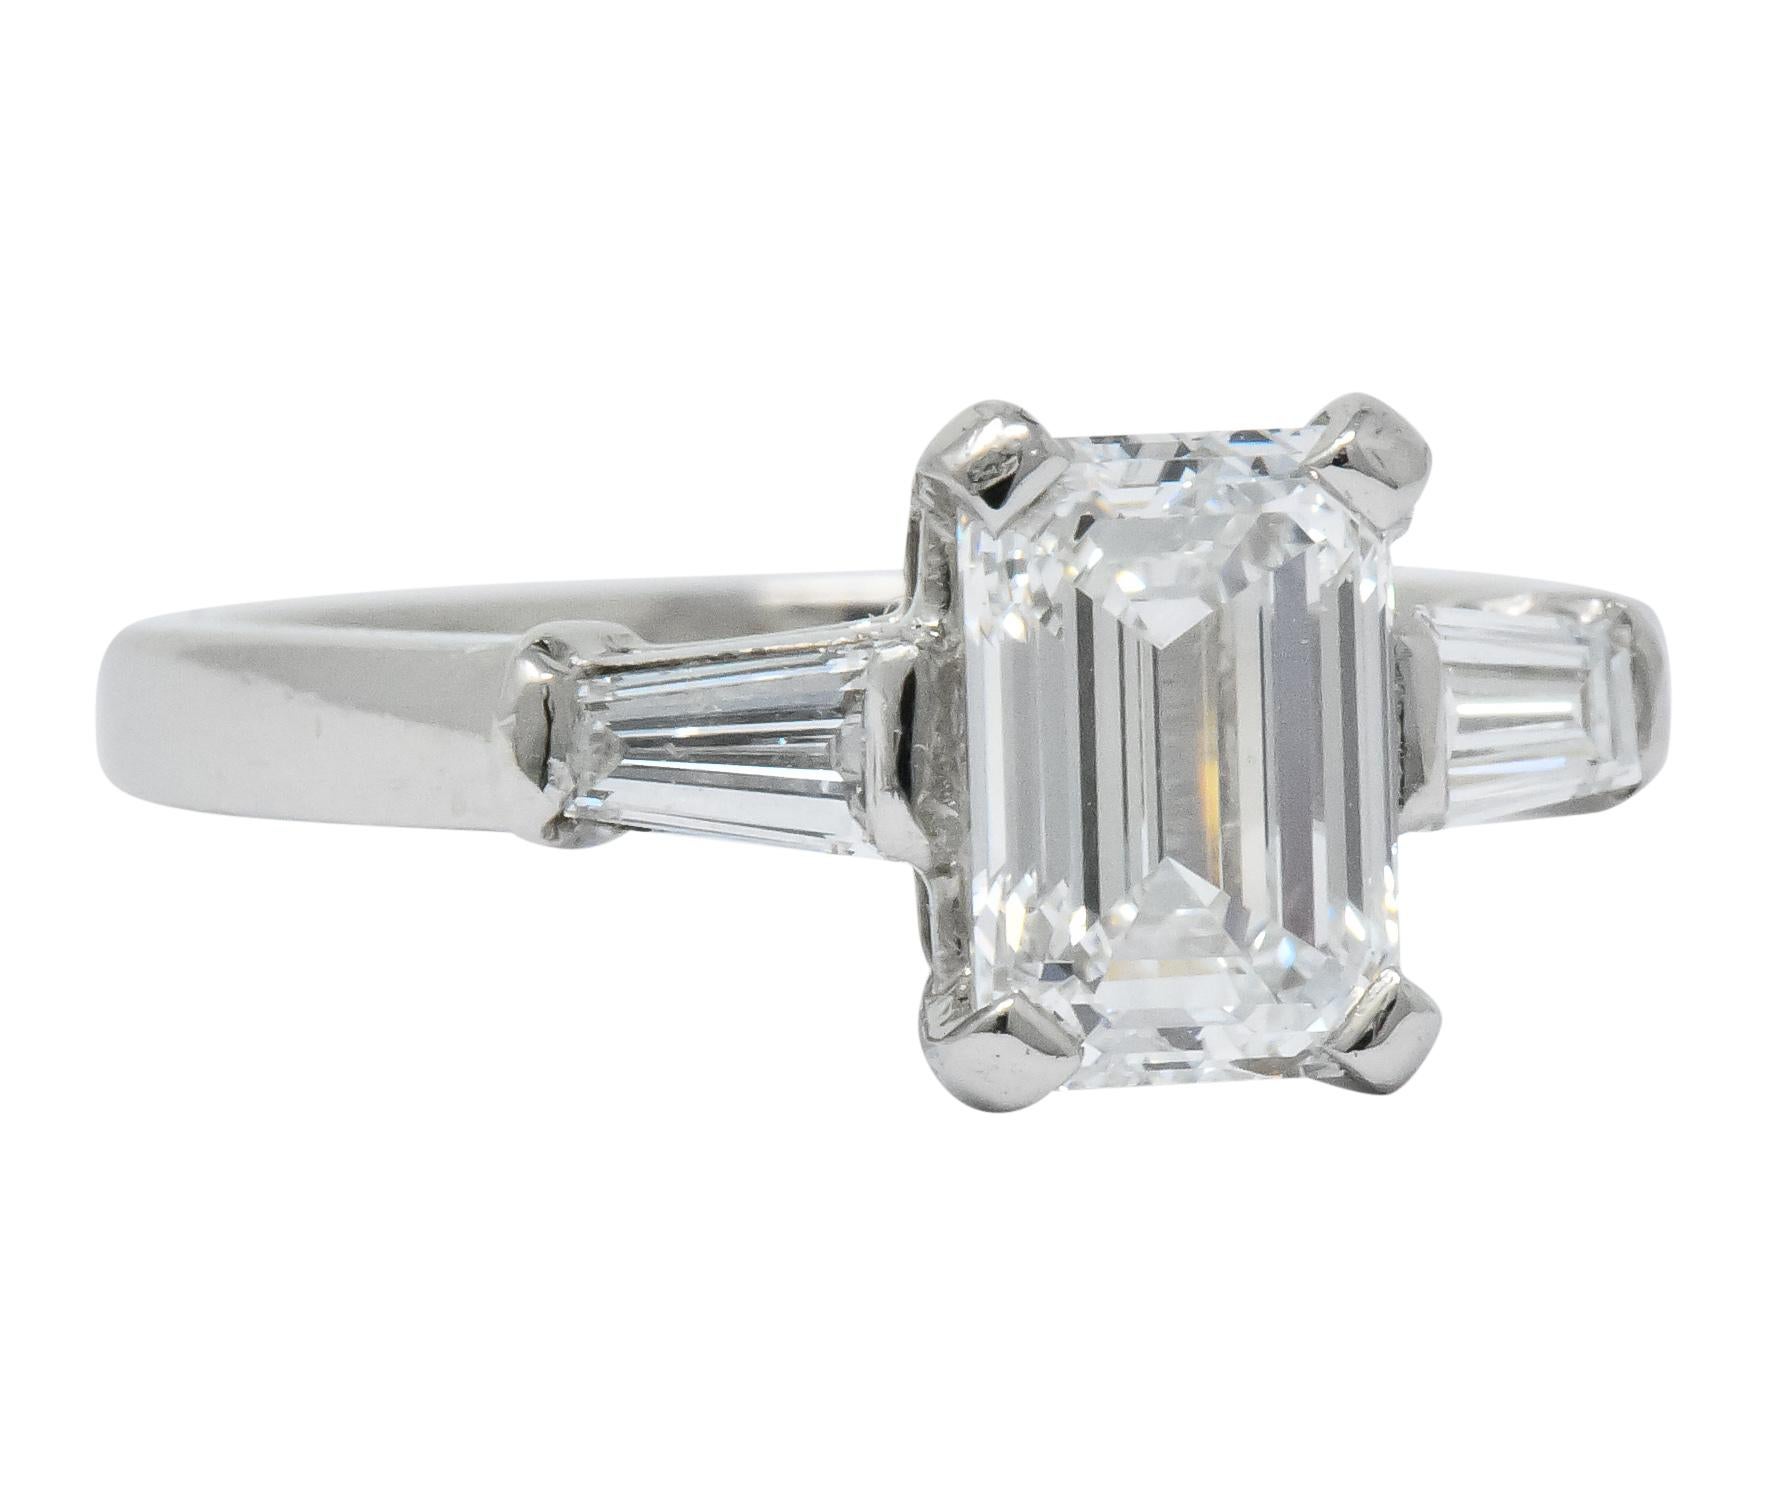 Centering a basket-set emerald cut diamond weighing 1.20 carats, E color and VVS2

Flanked by channel set, tapered baguette cut diamonds weighing approximately 0.28 carat total, E/F color and VVS clarity

1.48 CTW

Fully signed Bulgari with Italian